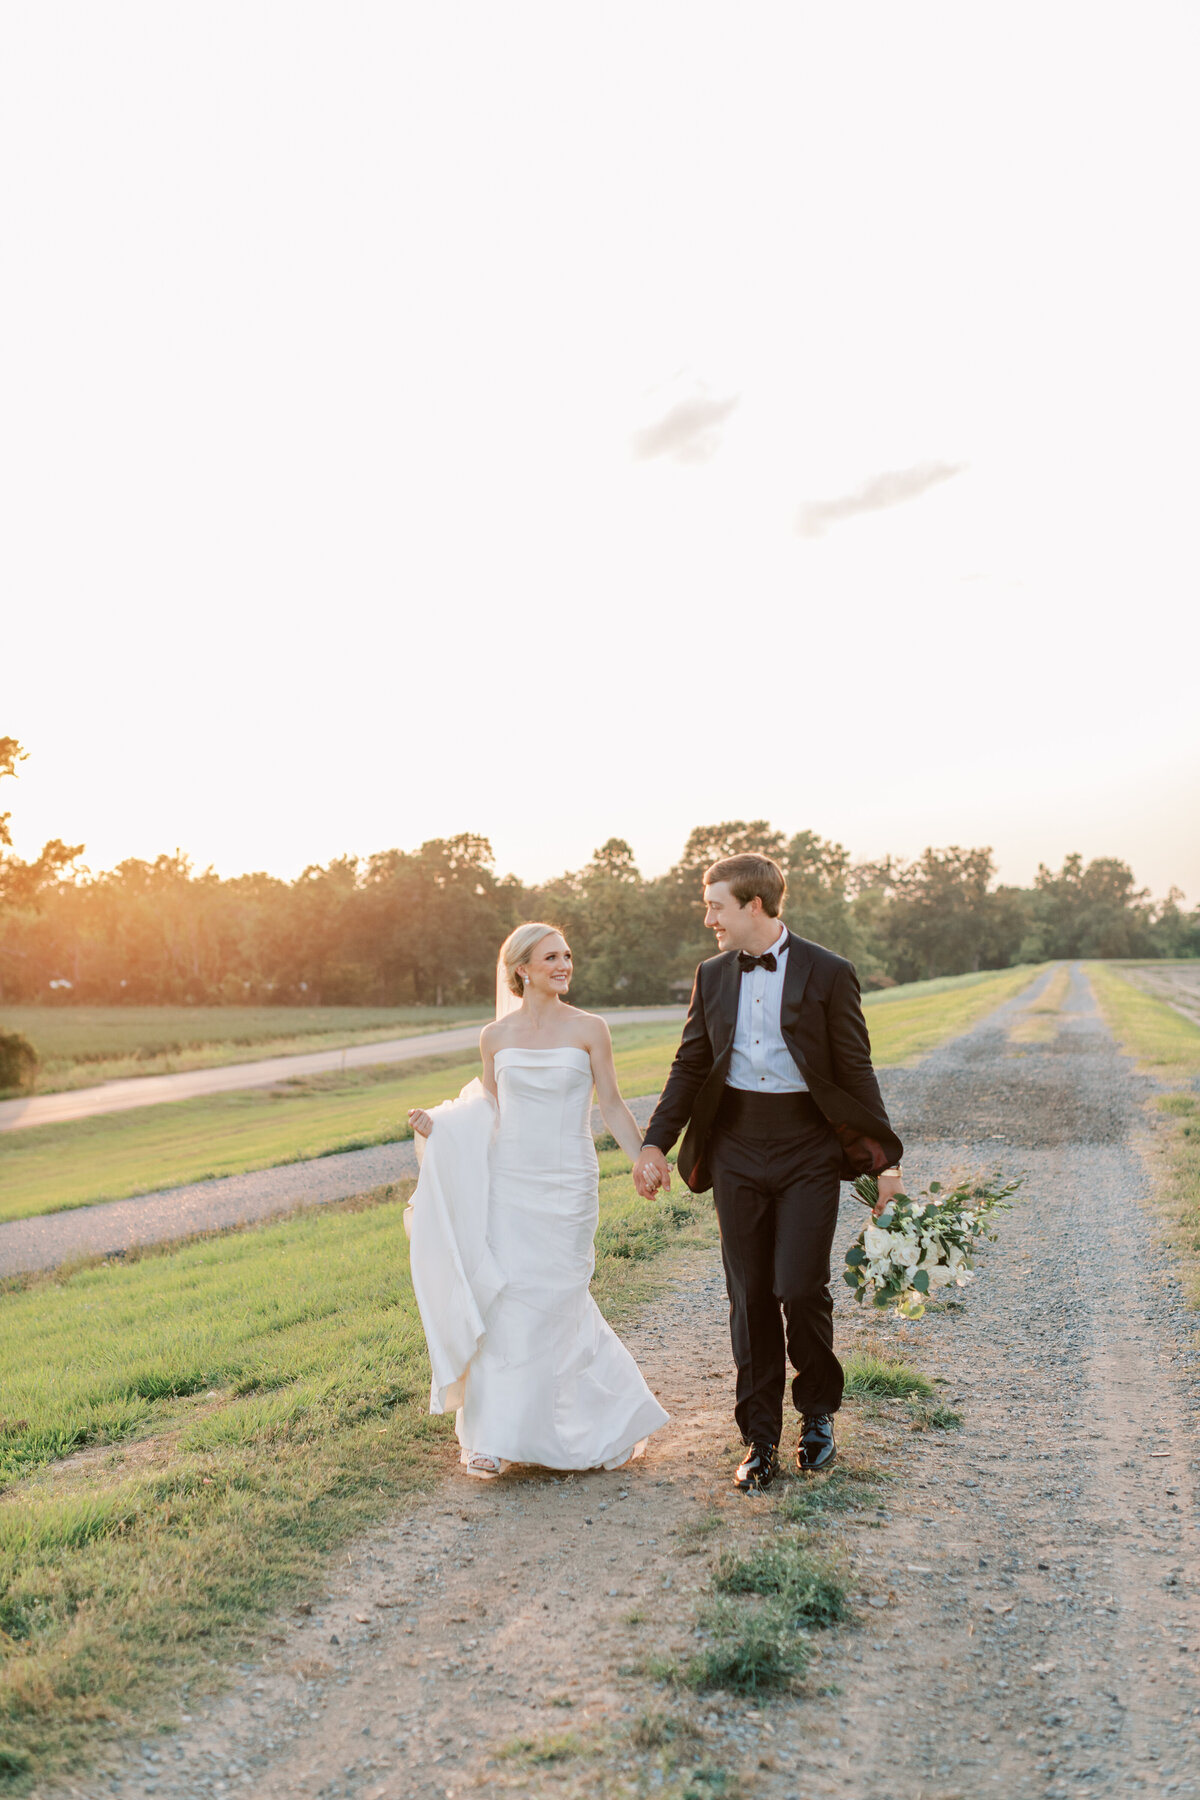 A husband and wife walk hand in hand with the sunset behind them.